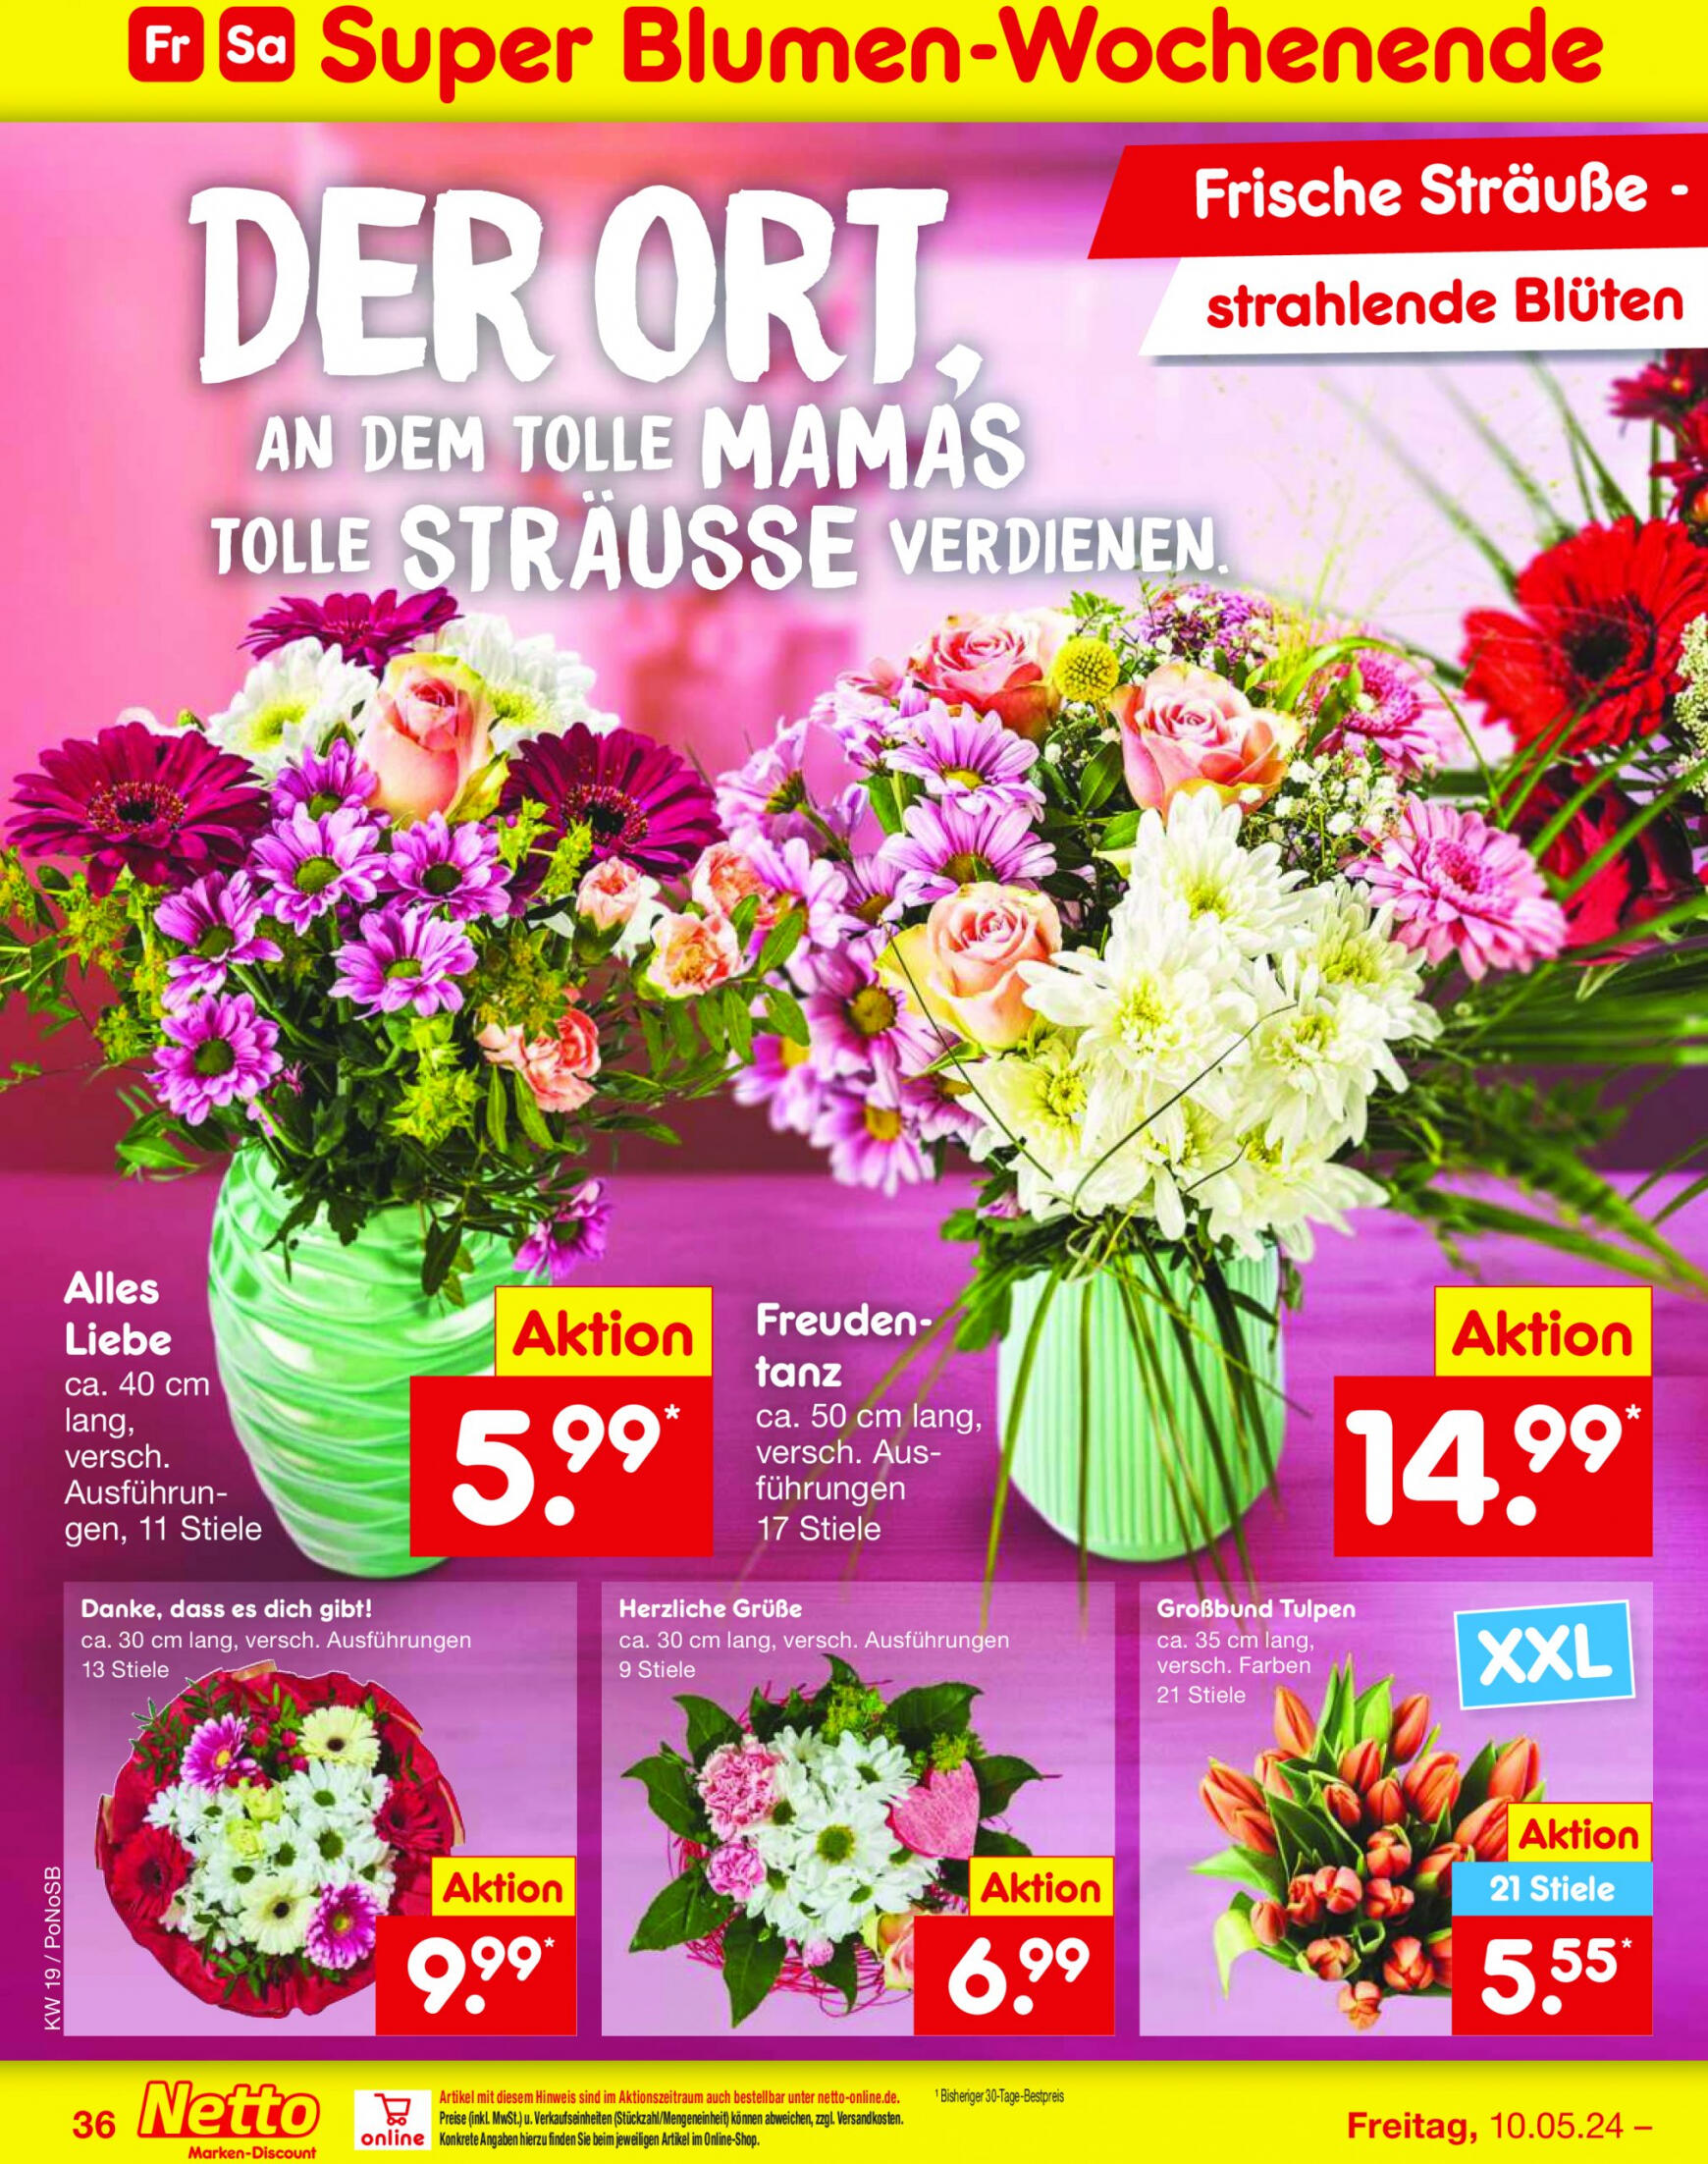 netto - Flyer Netto aktuell 06.05. - 11.05. - page: 46